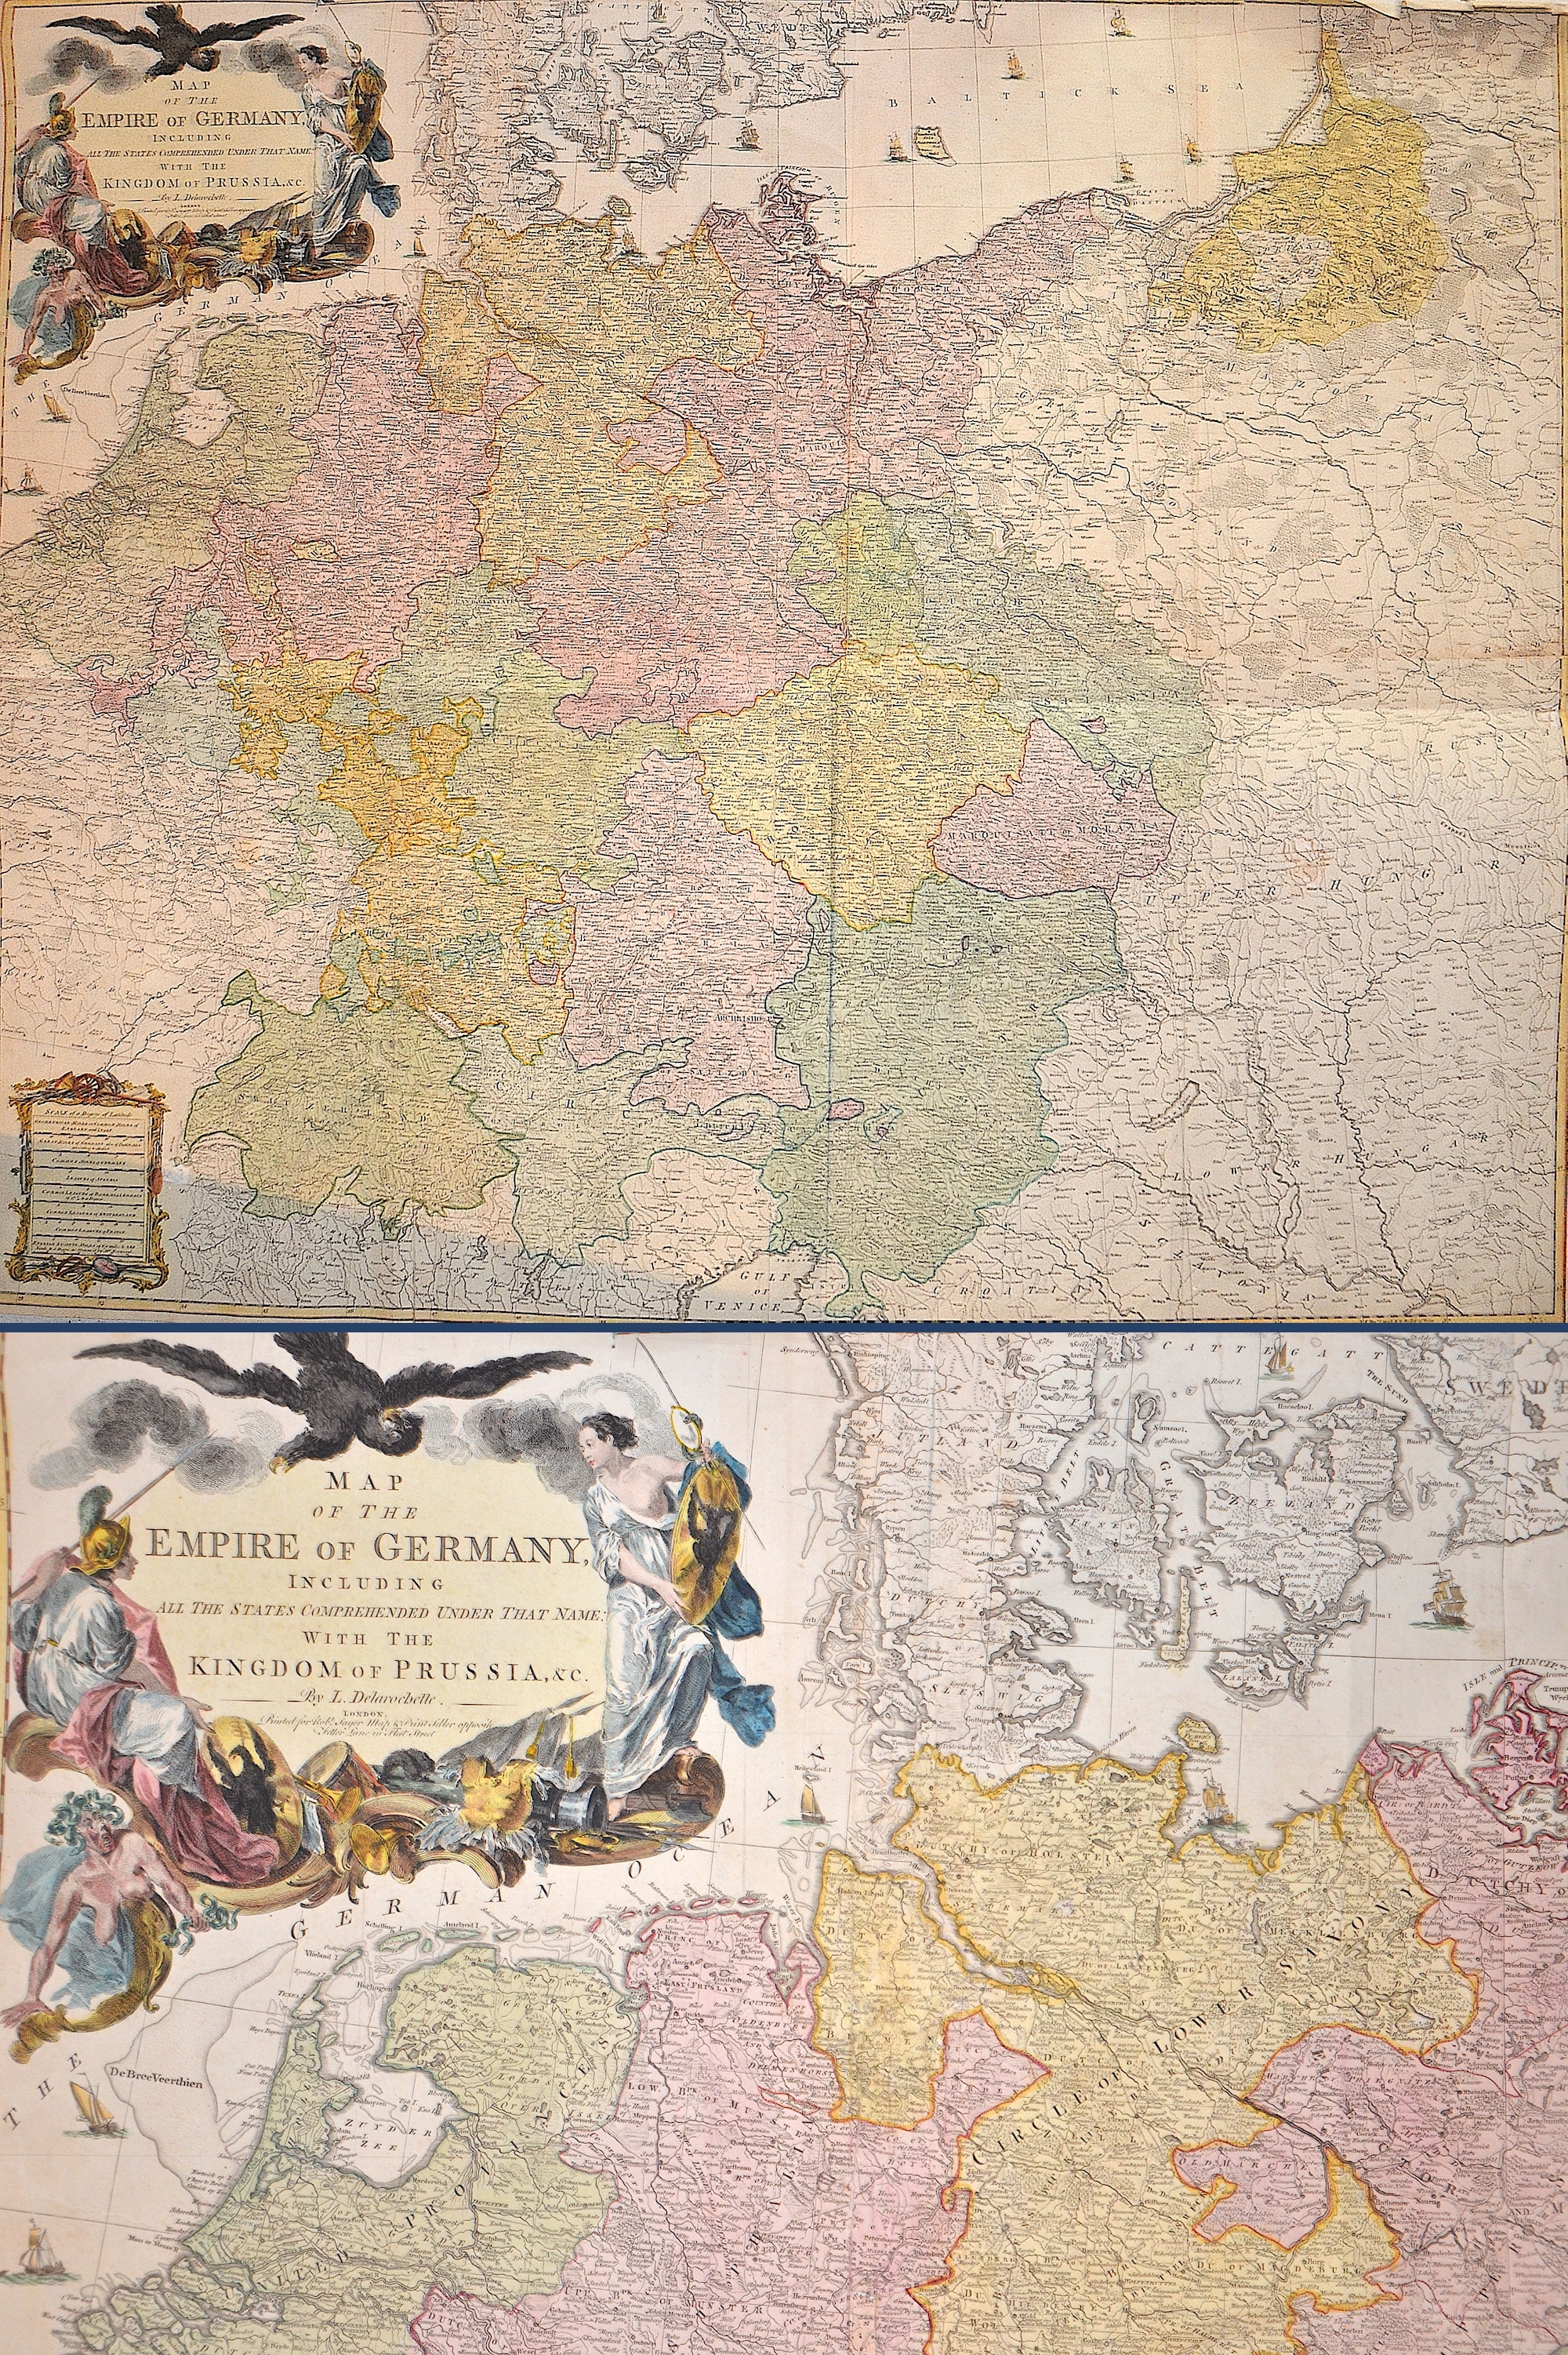 Delarochete Louis Map of the Empire of Germany, including all the States comprehended under that Name with the Kingdom of Prussia, & c.